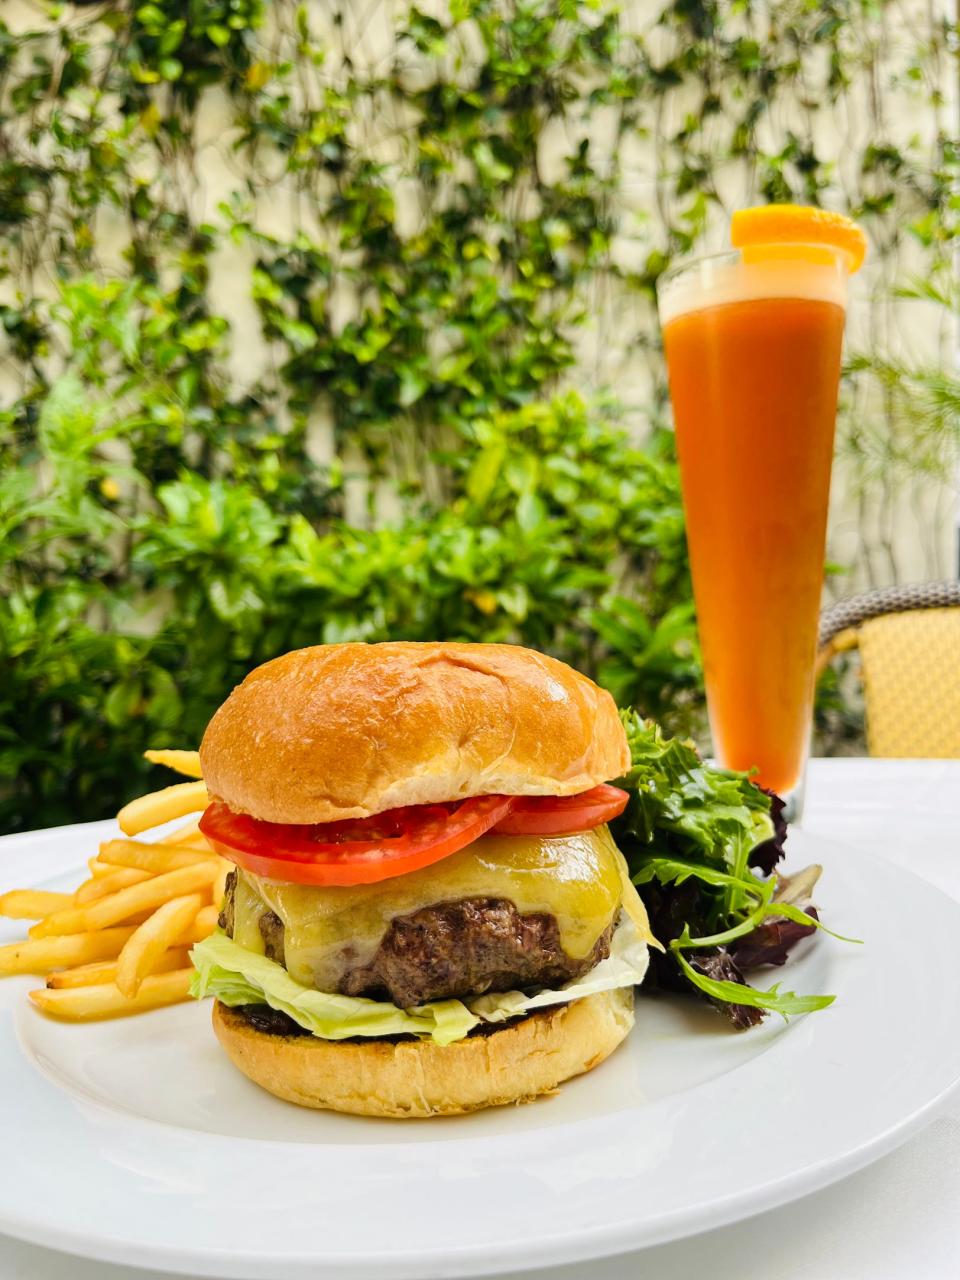 A Wagyu burger and special beer cocktail will be featured July 4 at Le Bilboquet.